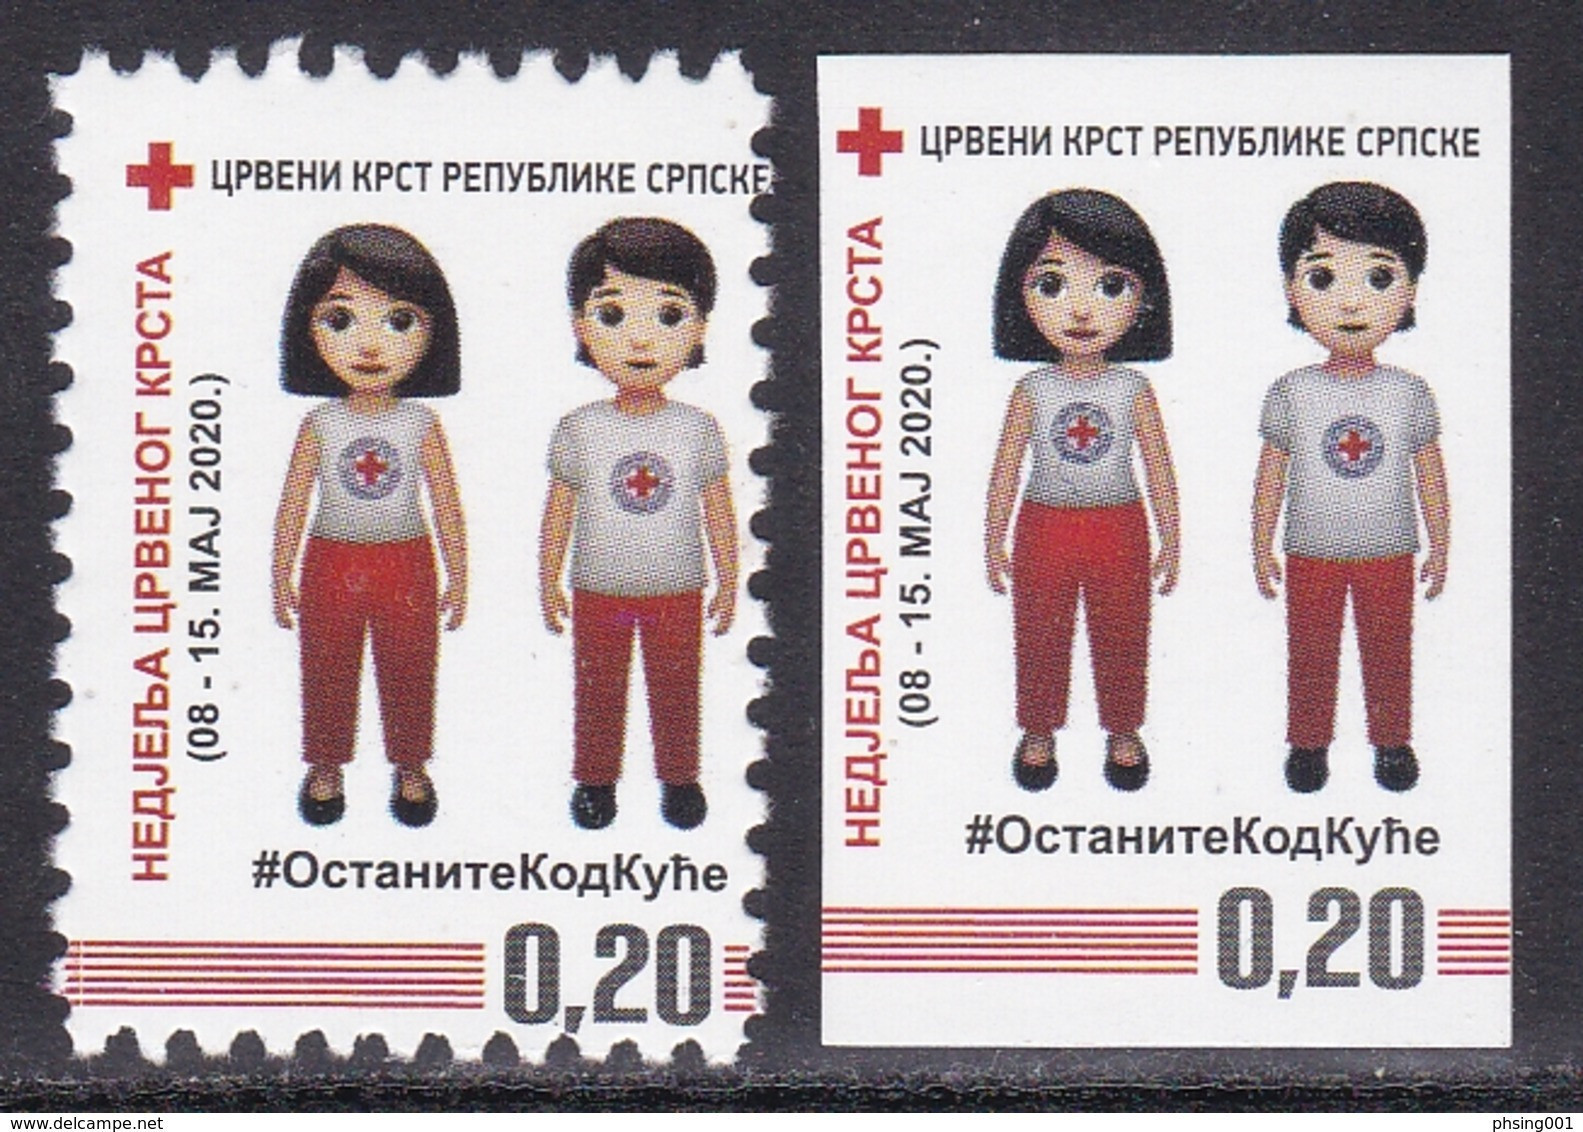 Bosnia Serbia 2020 Red Cross Croix Rouge Rotes Kreuz Tax Charity Surcharge, Perforated + Imperforated Stamp MNH - Bosnien-Herzegowina